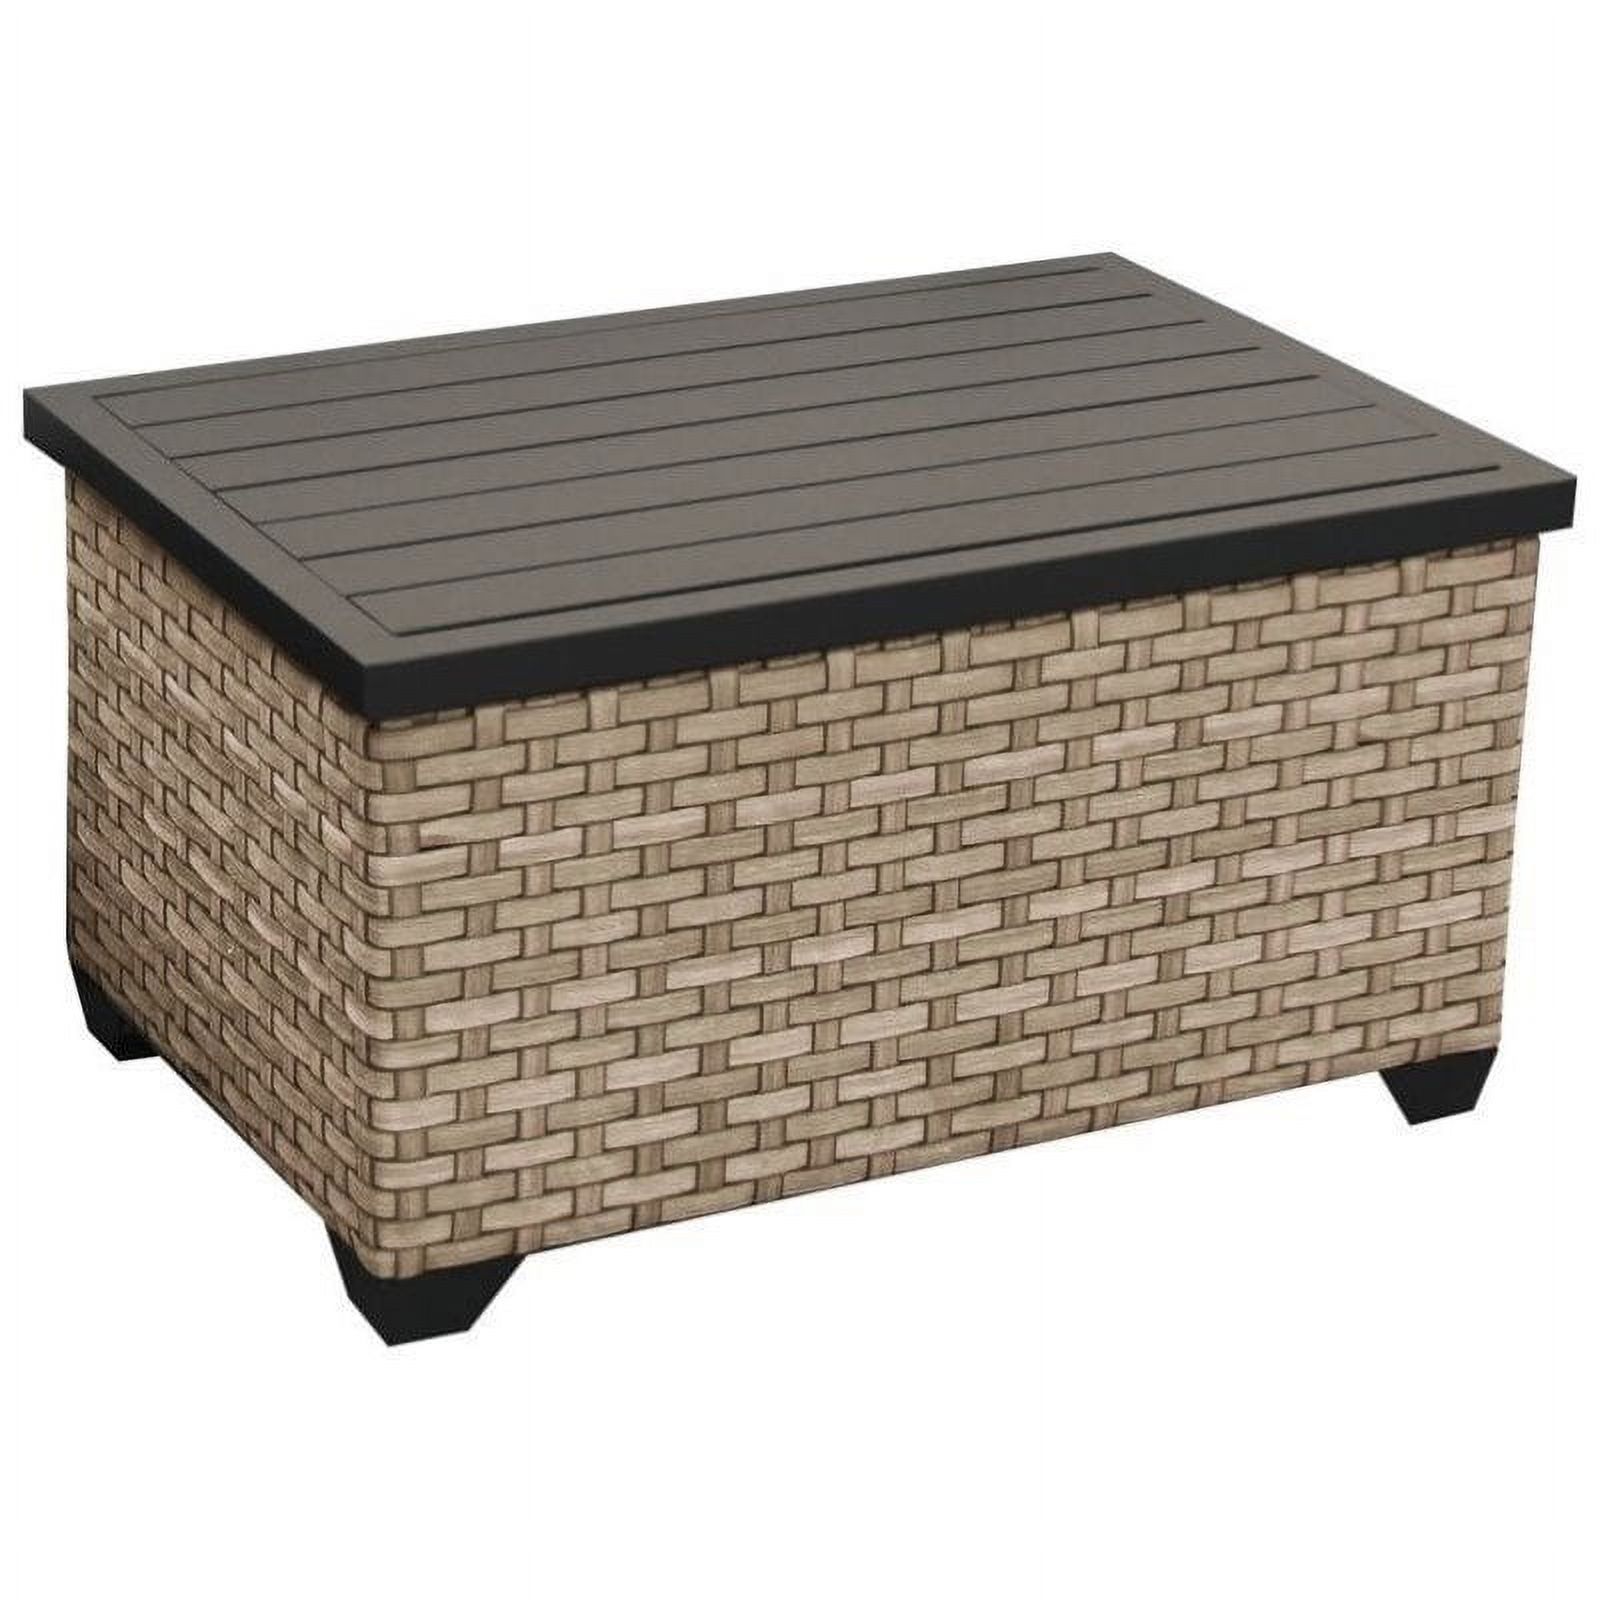 Bowery Hill Outdoor Wicker Storage Coffee Table in Summer Fog - image 1 of 3